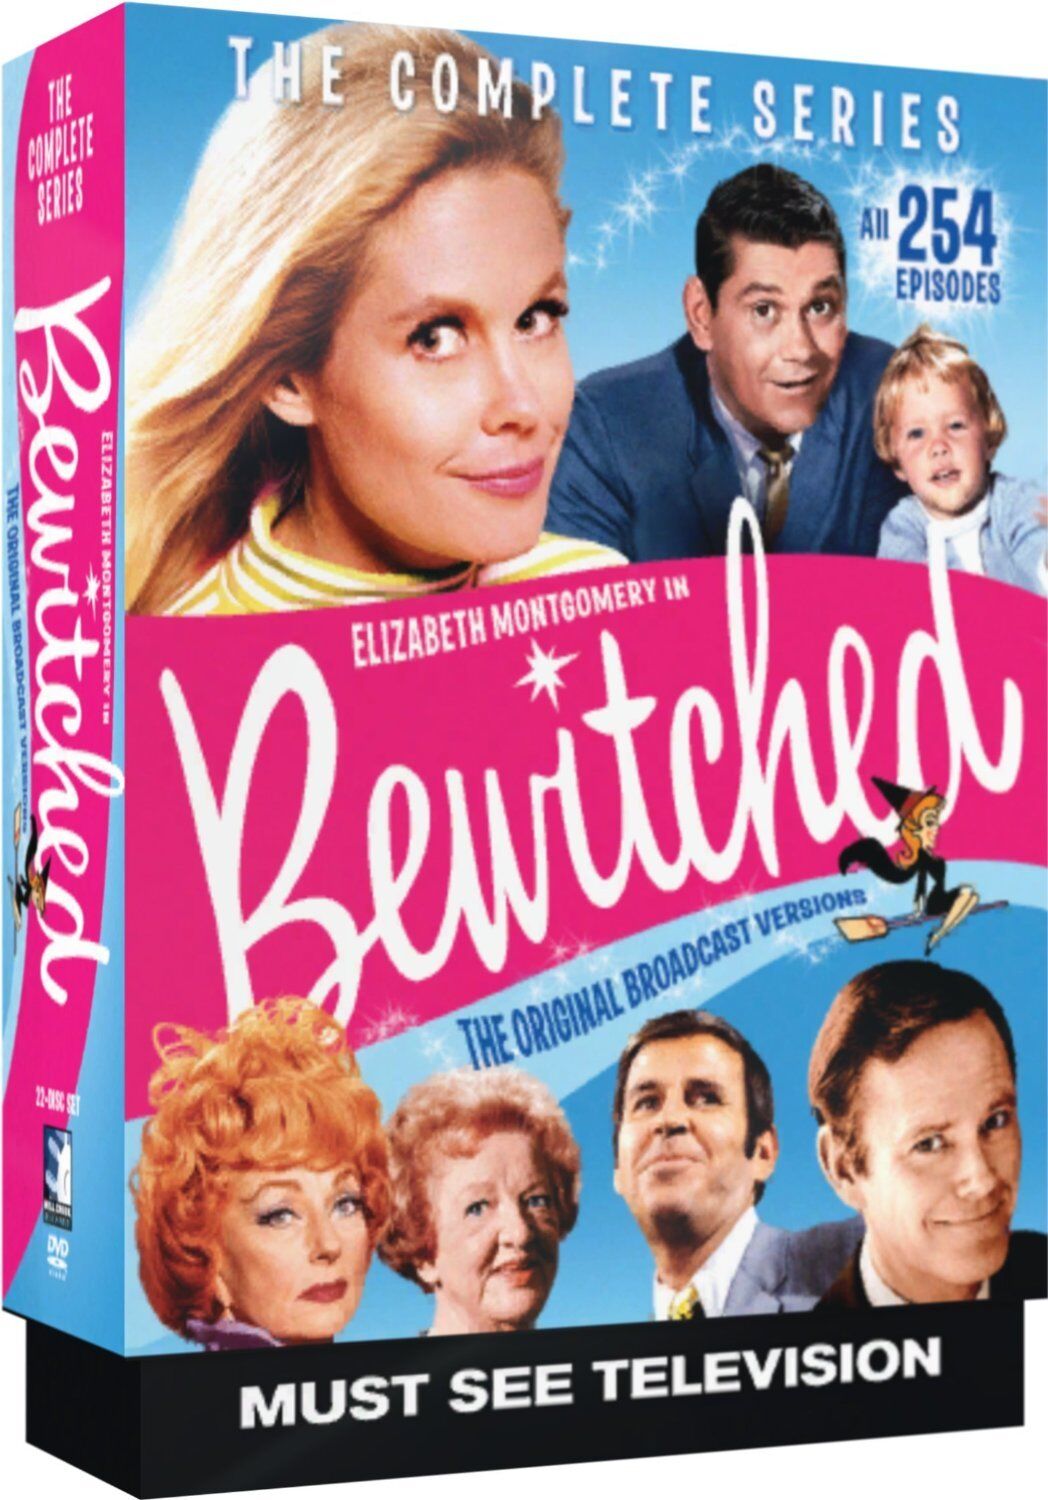 Bewitched - Complete Series